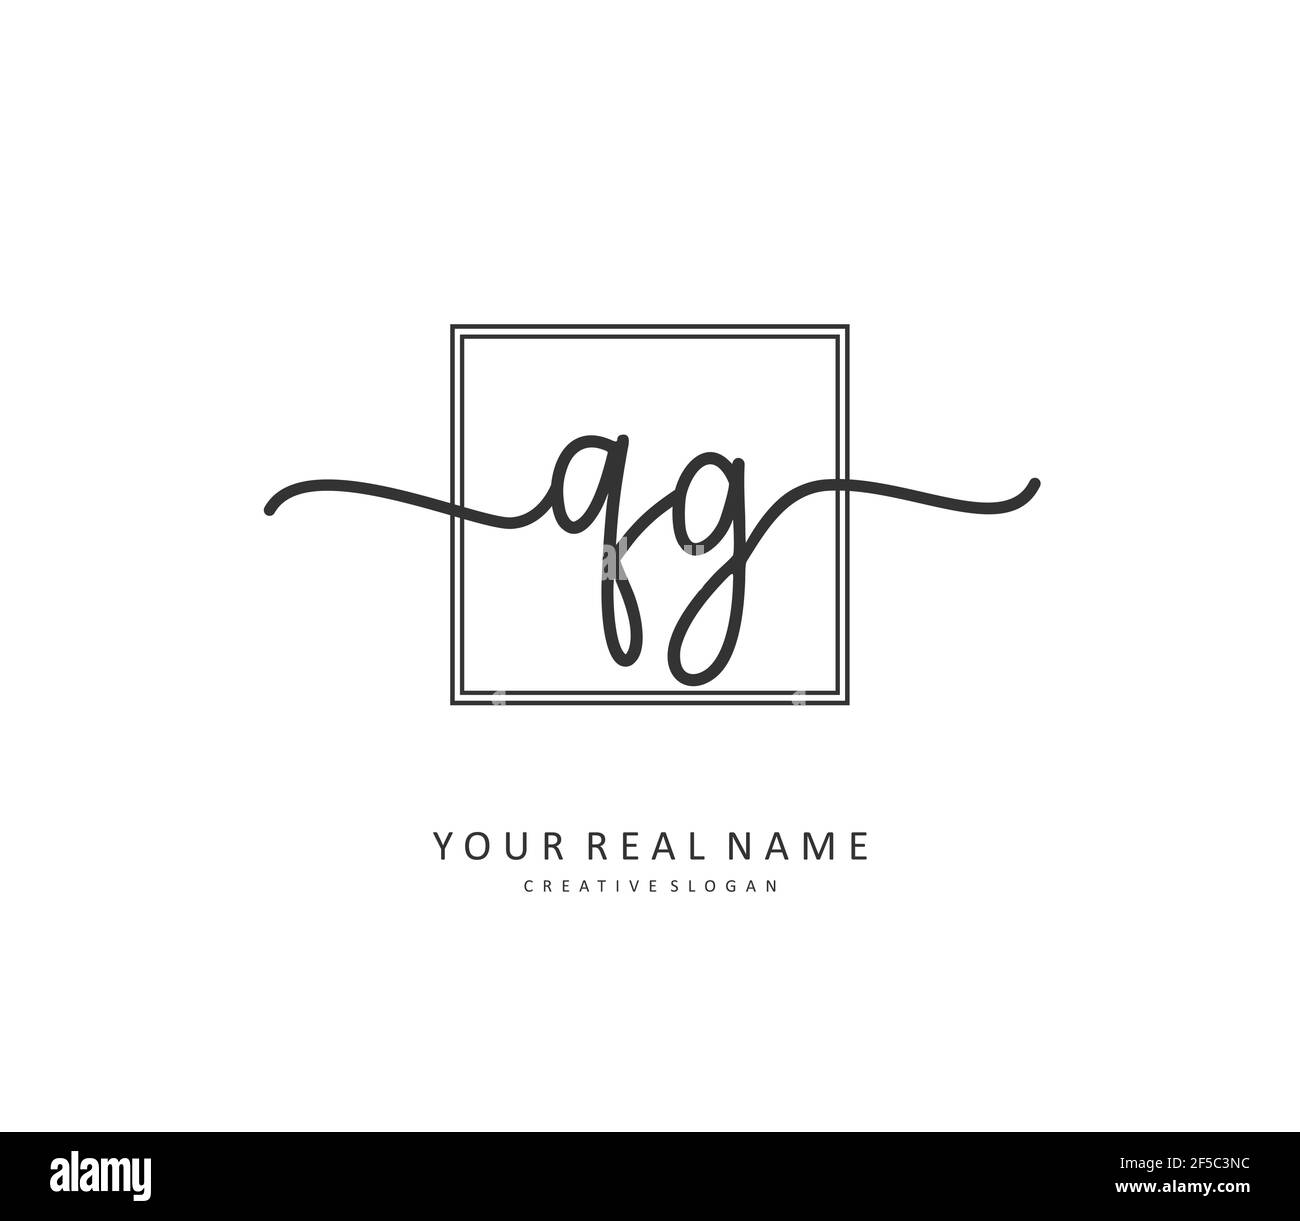 QG Initial letter handwriting and signature logo. A concept handwriting initial logo with template element. Stock Vector